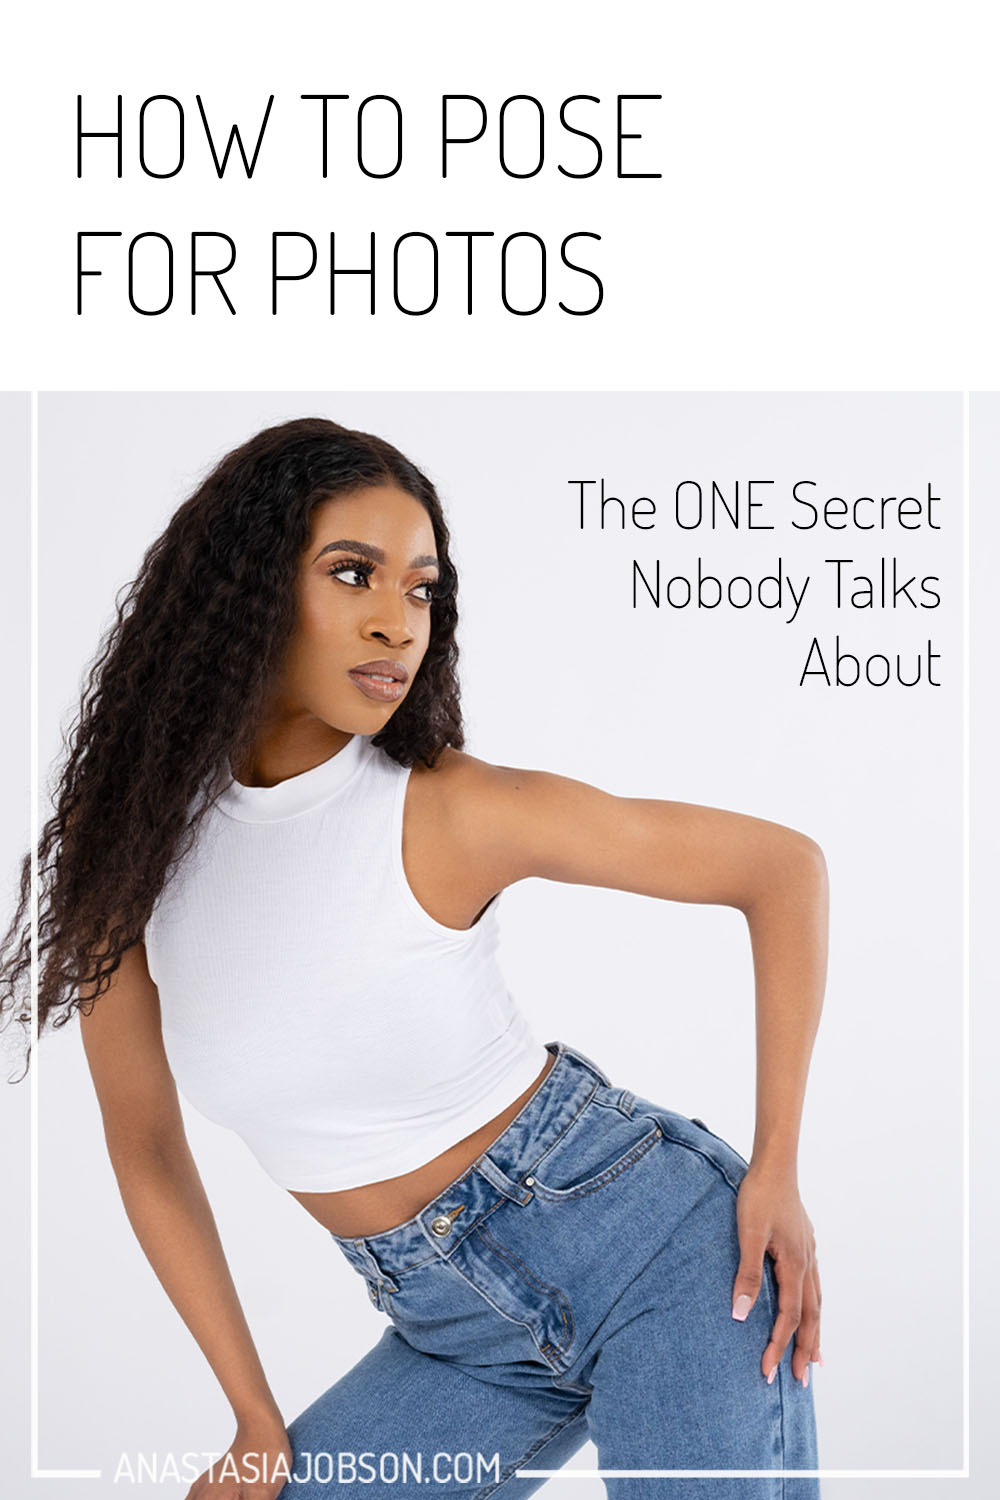 The 7 Best Model Poses for a Successful Photo Session